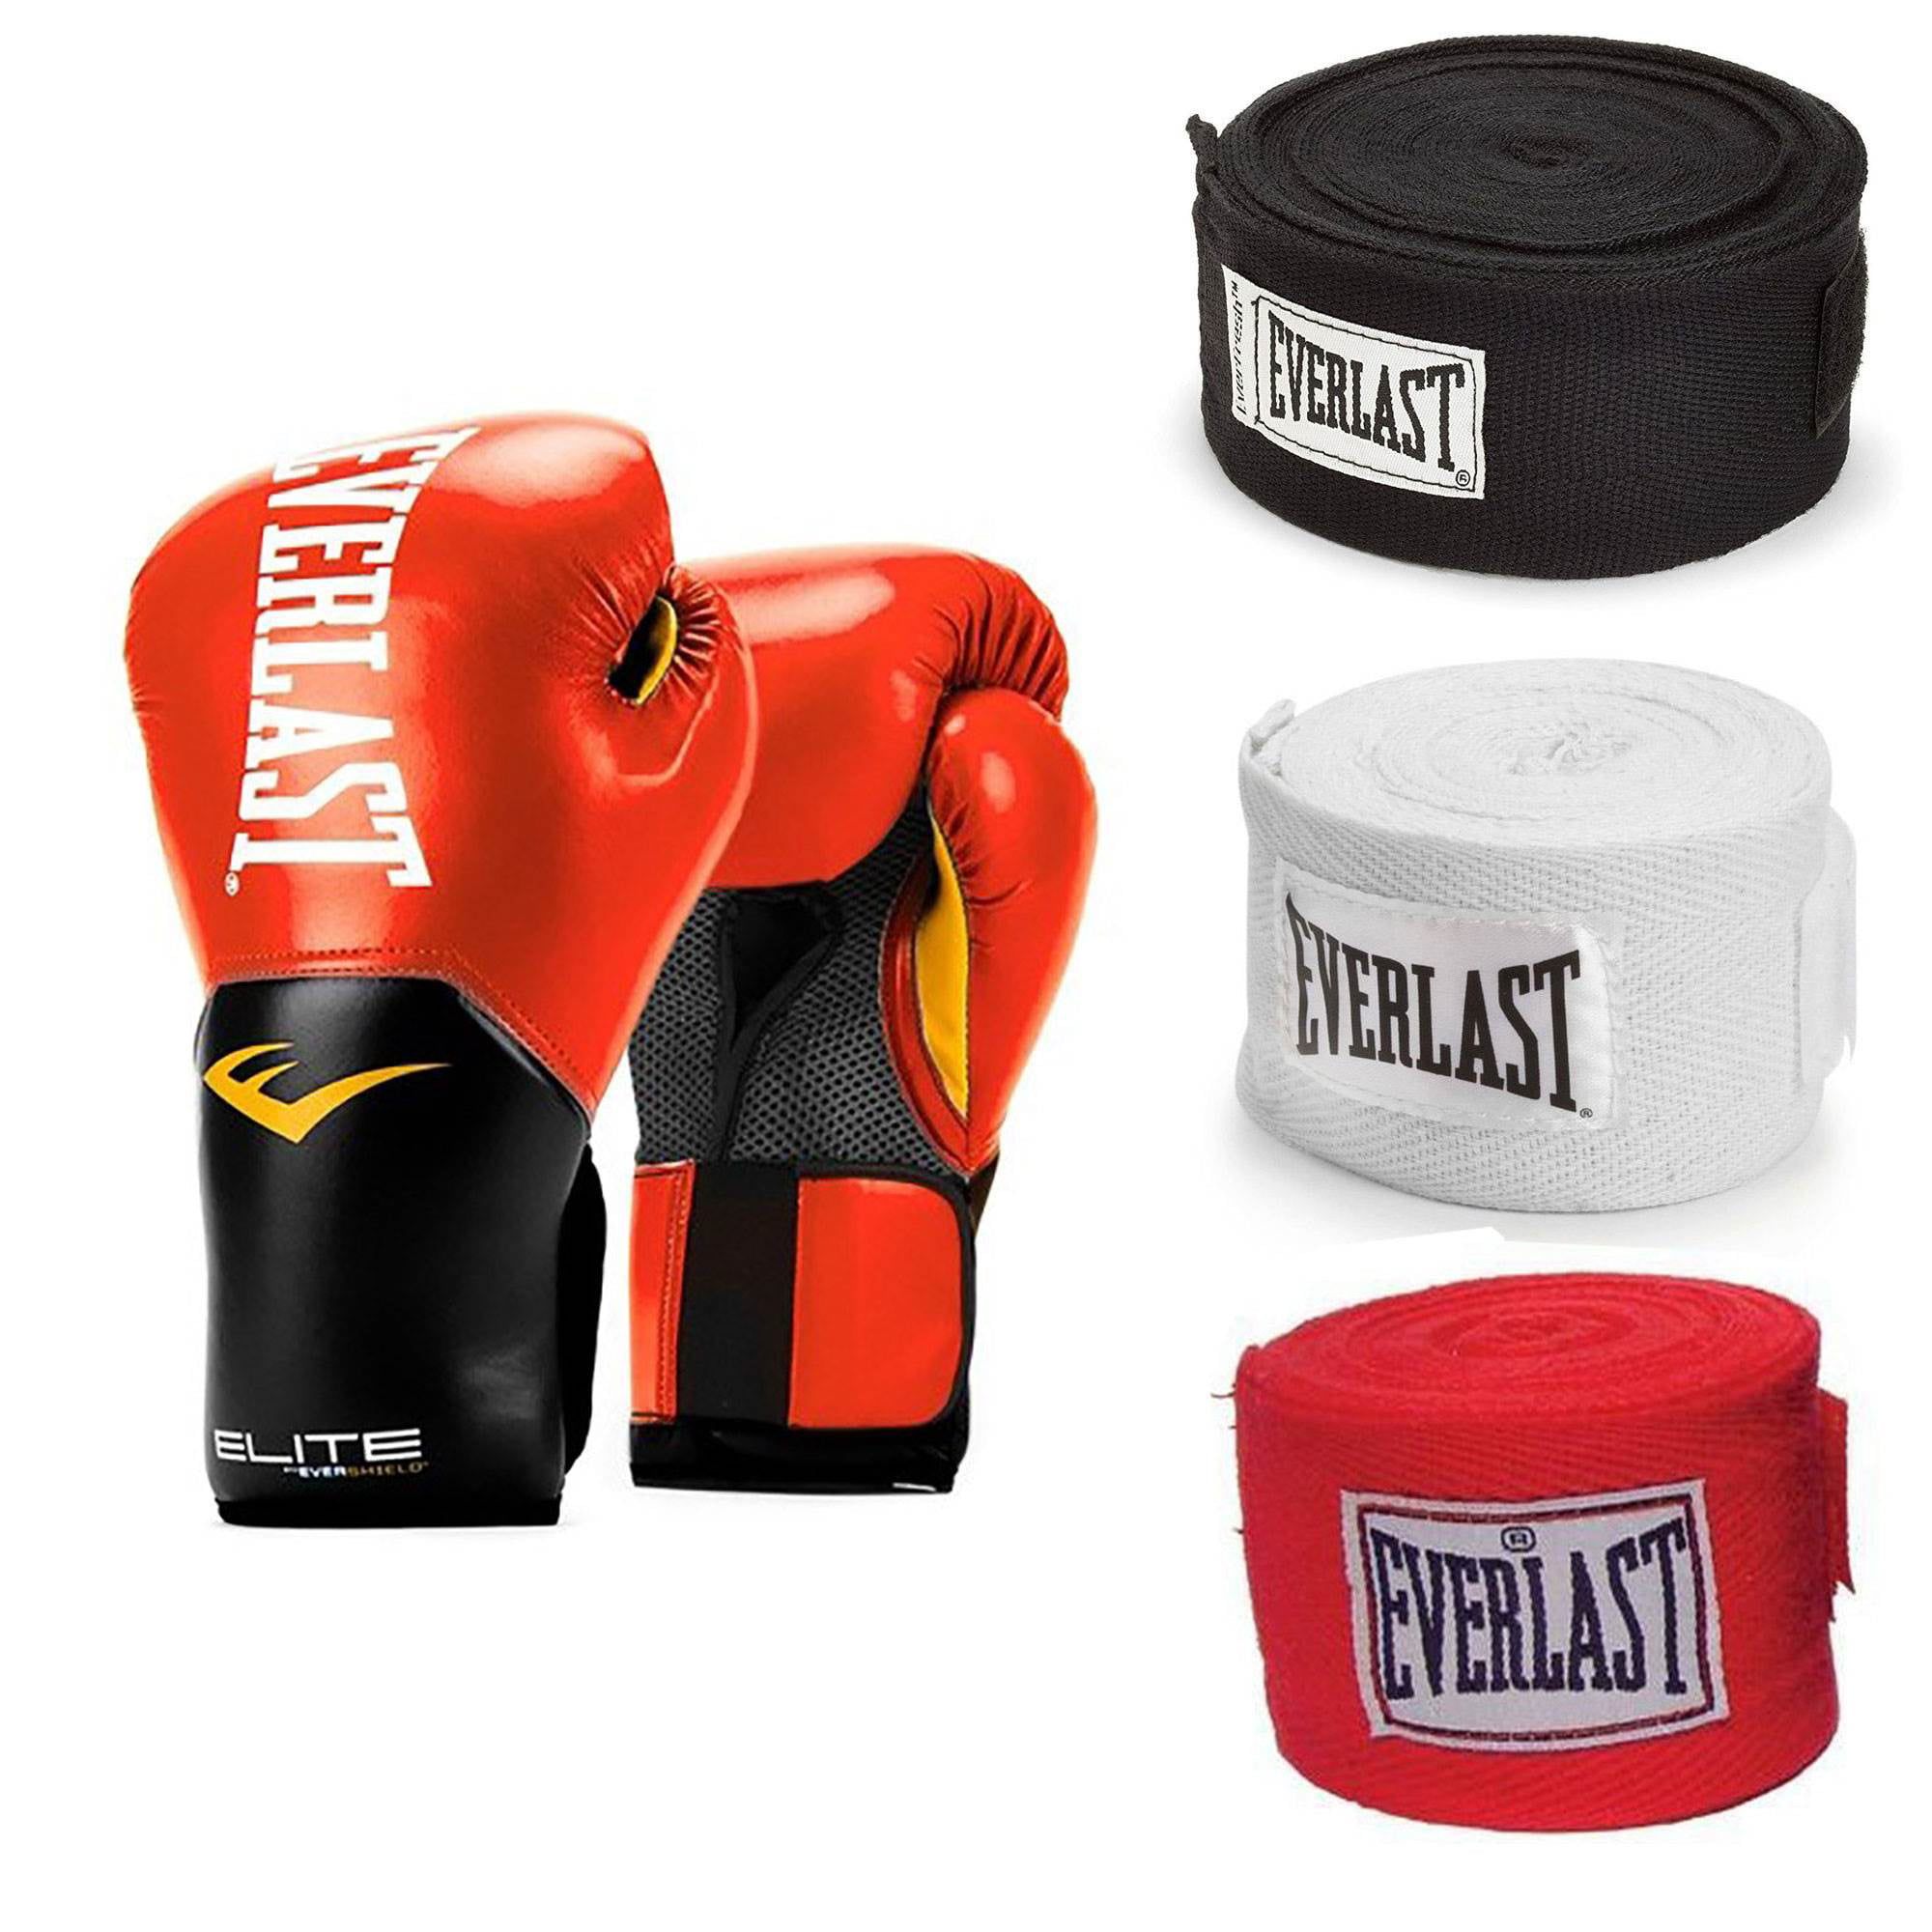 Everlast Free Standing Punch Bag Boxing Set With Gloves & Hand Wraps